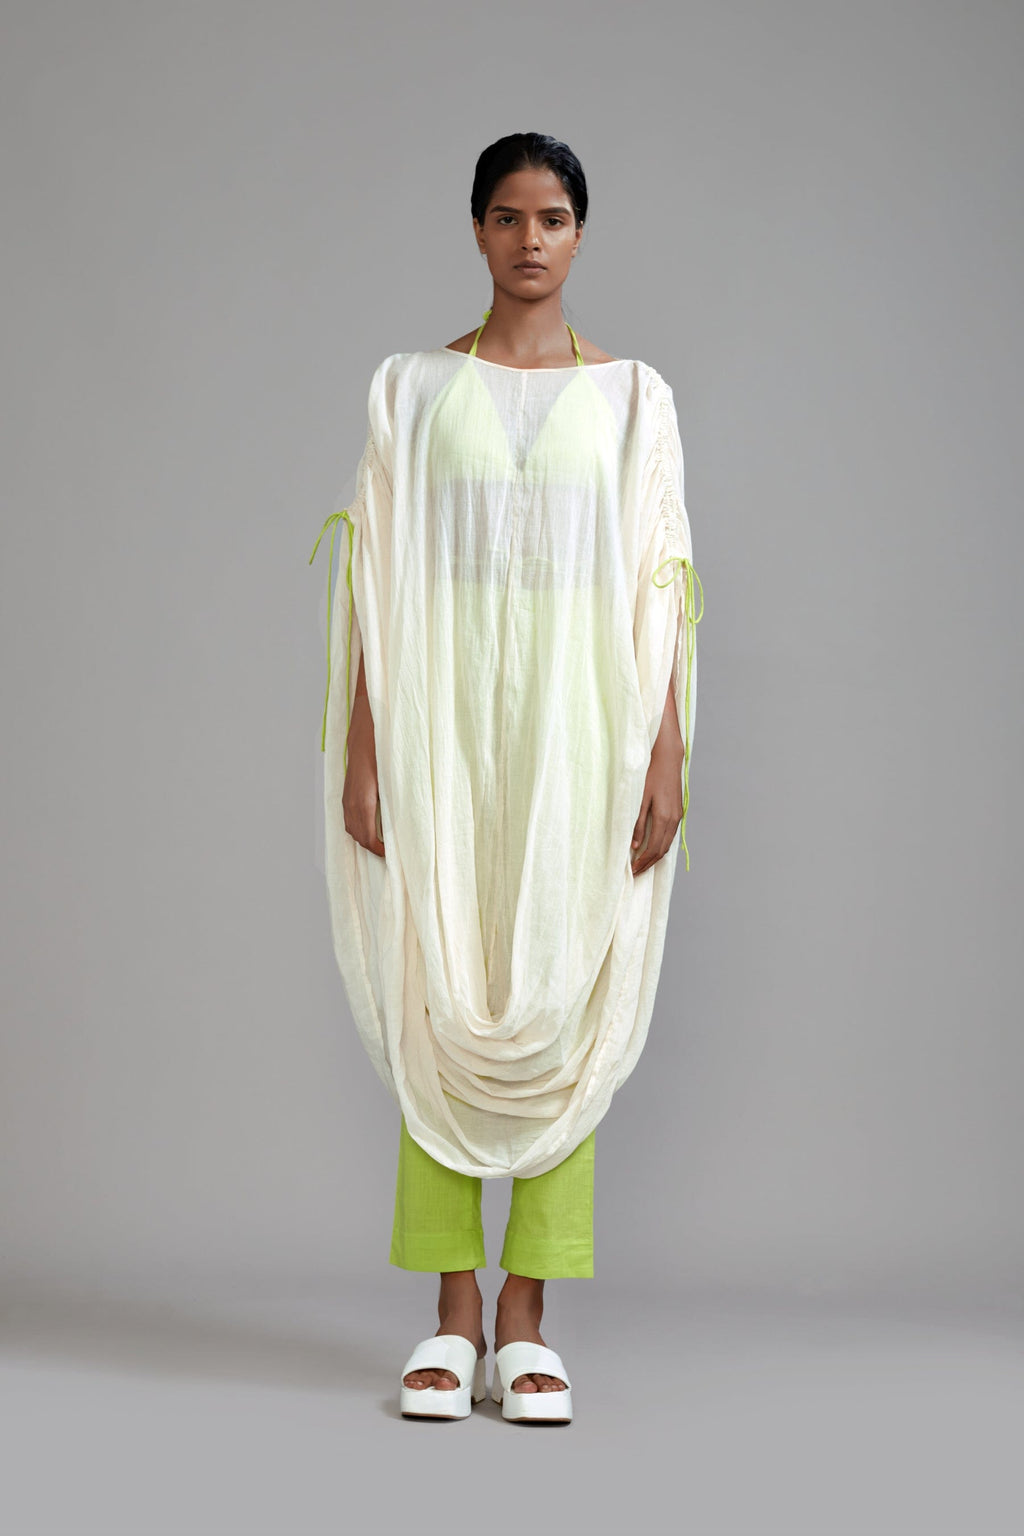 Mati Dresses Off-White with Neon Green Gathered Cowl Tunic